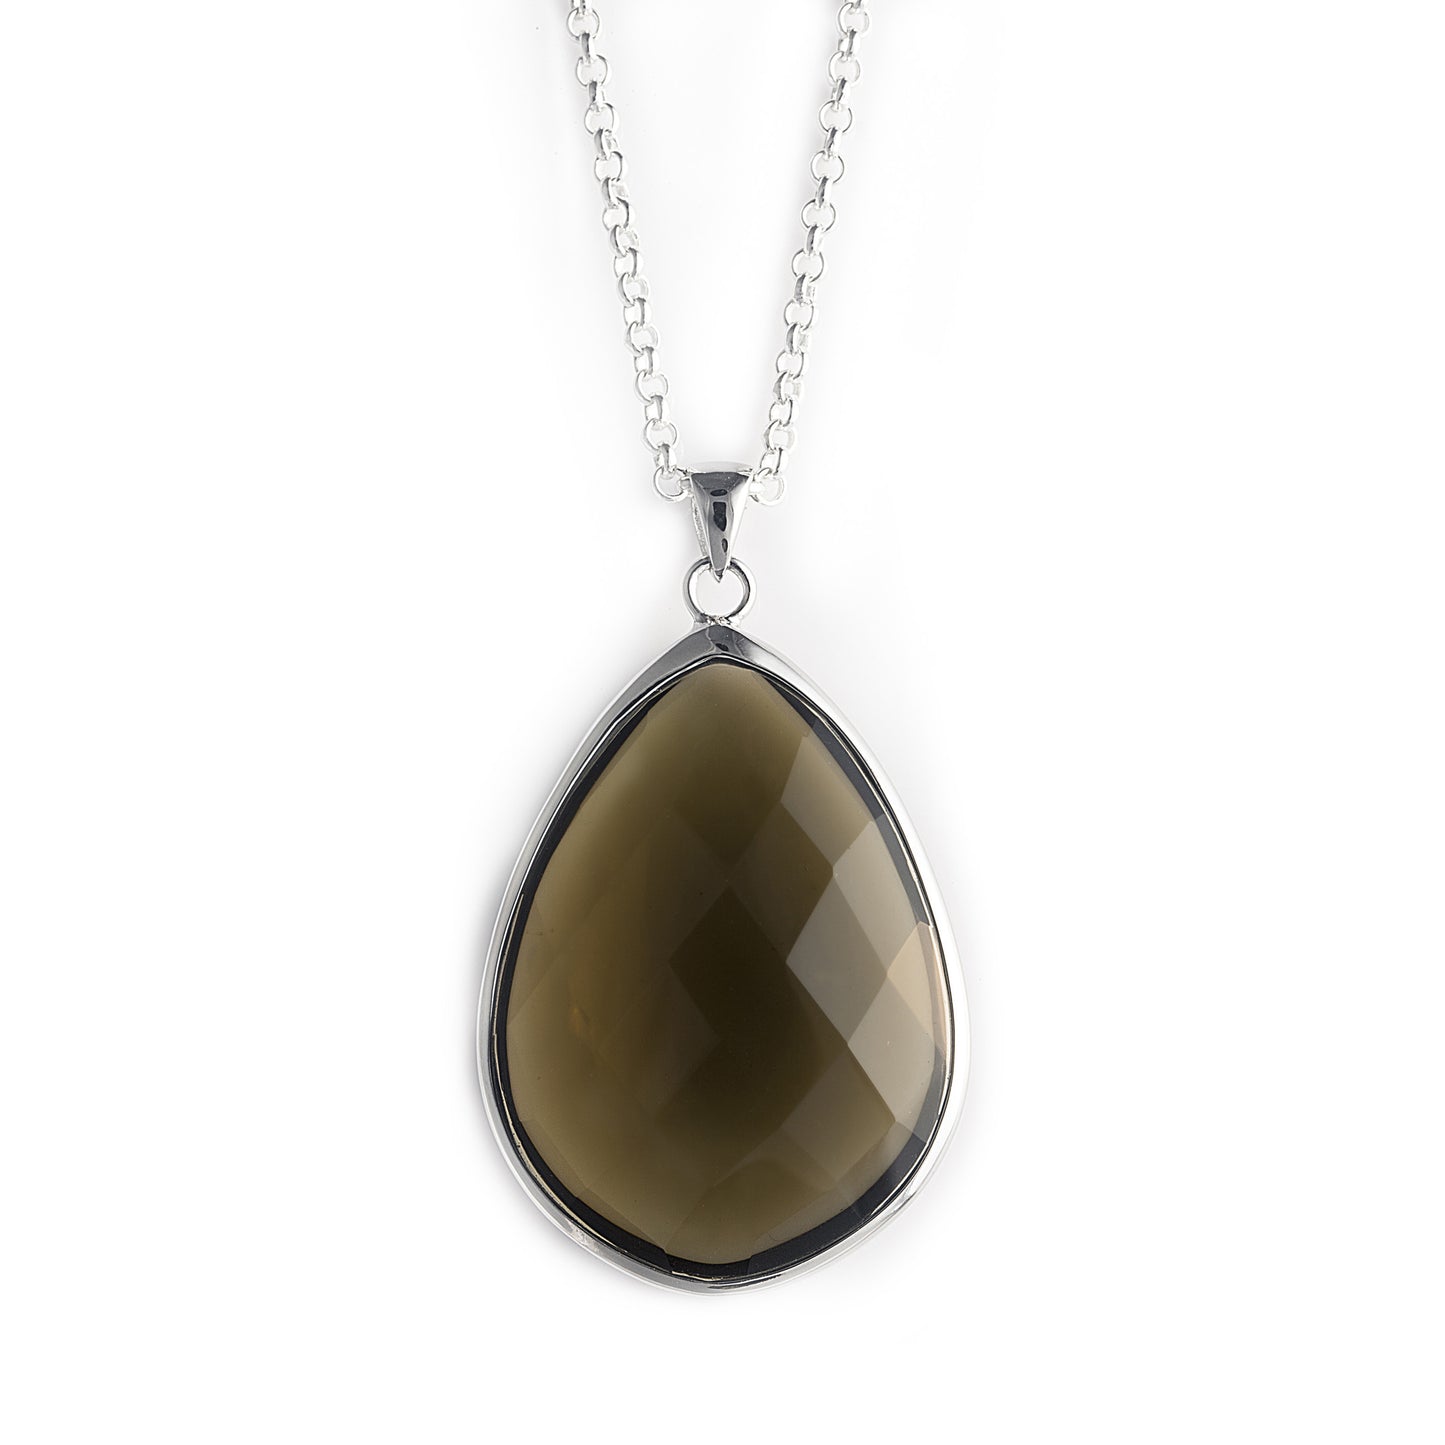 Smoky Delta Necklace in 925 sterling silver with facet-cut smoky obsidian. Worldwide shipping. Affordable luxury jewellery by Bellagio & Co.